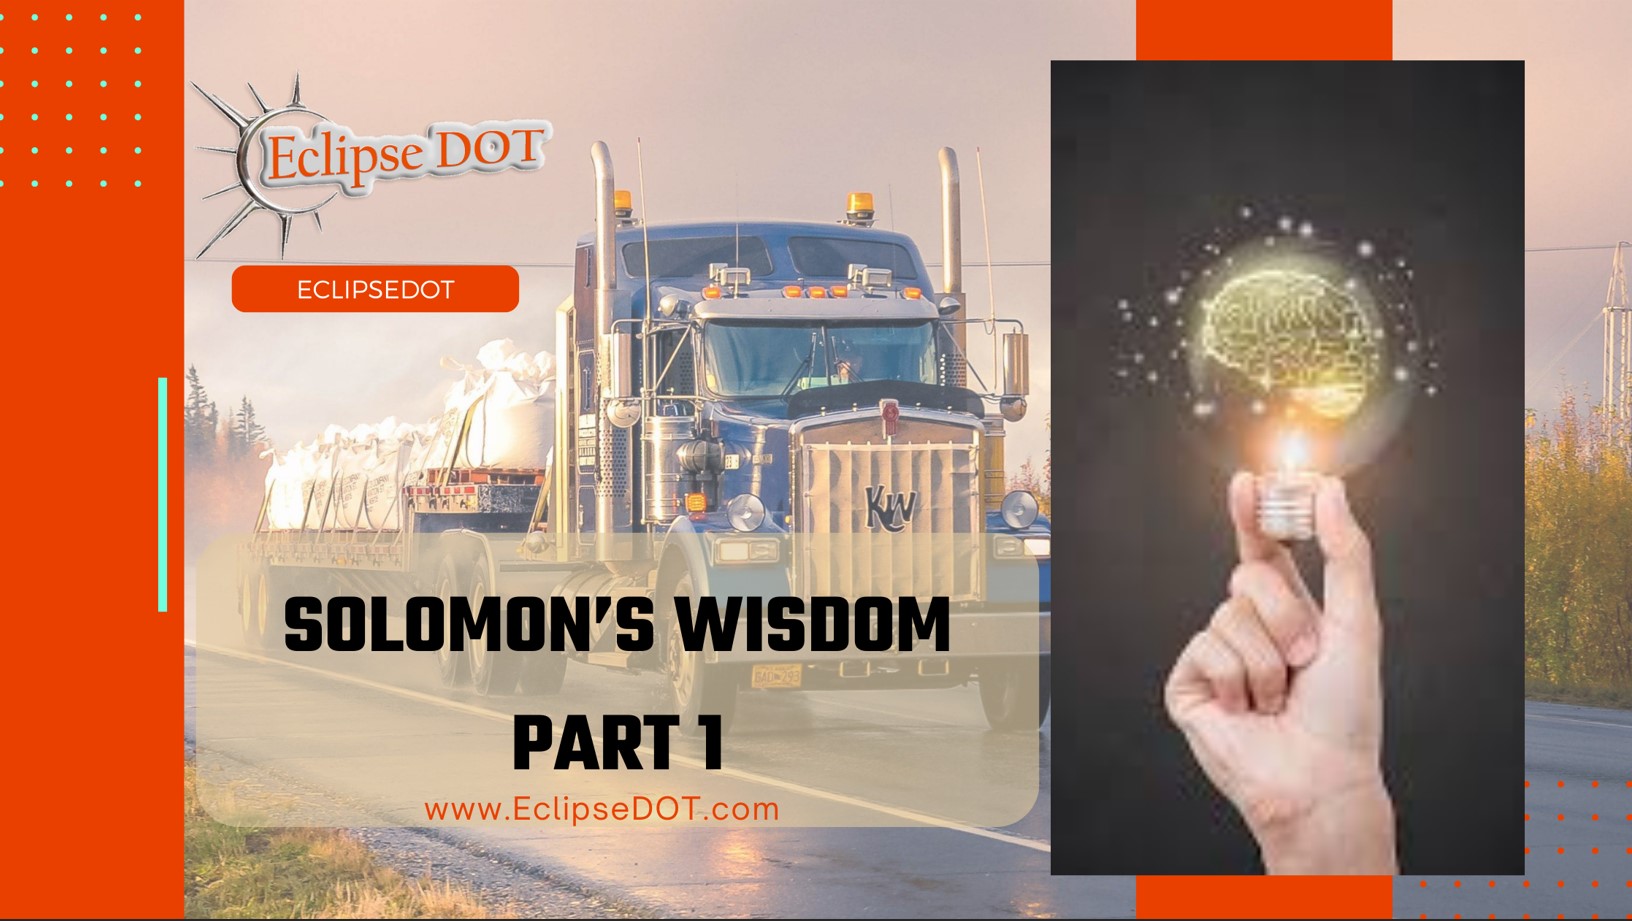 Elevate your game with potent principles for a richer daily existence - Wisdom from Solomon